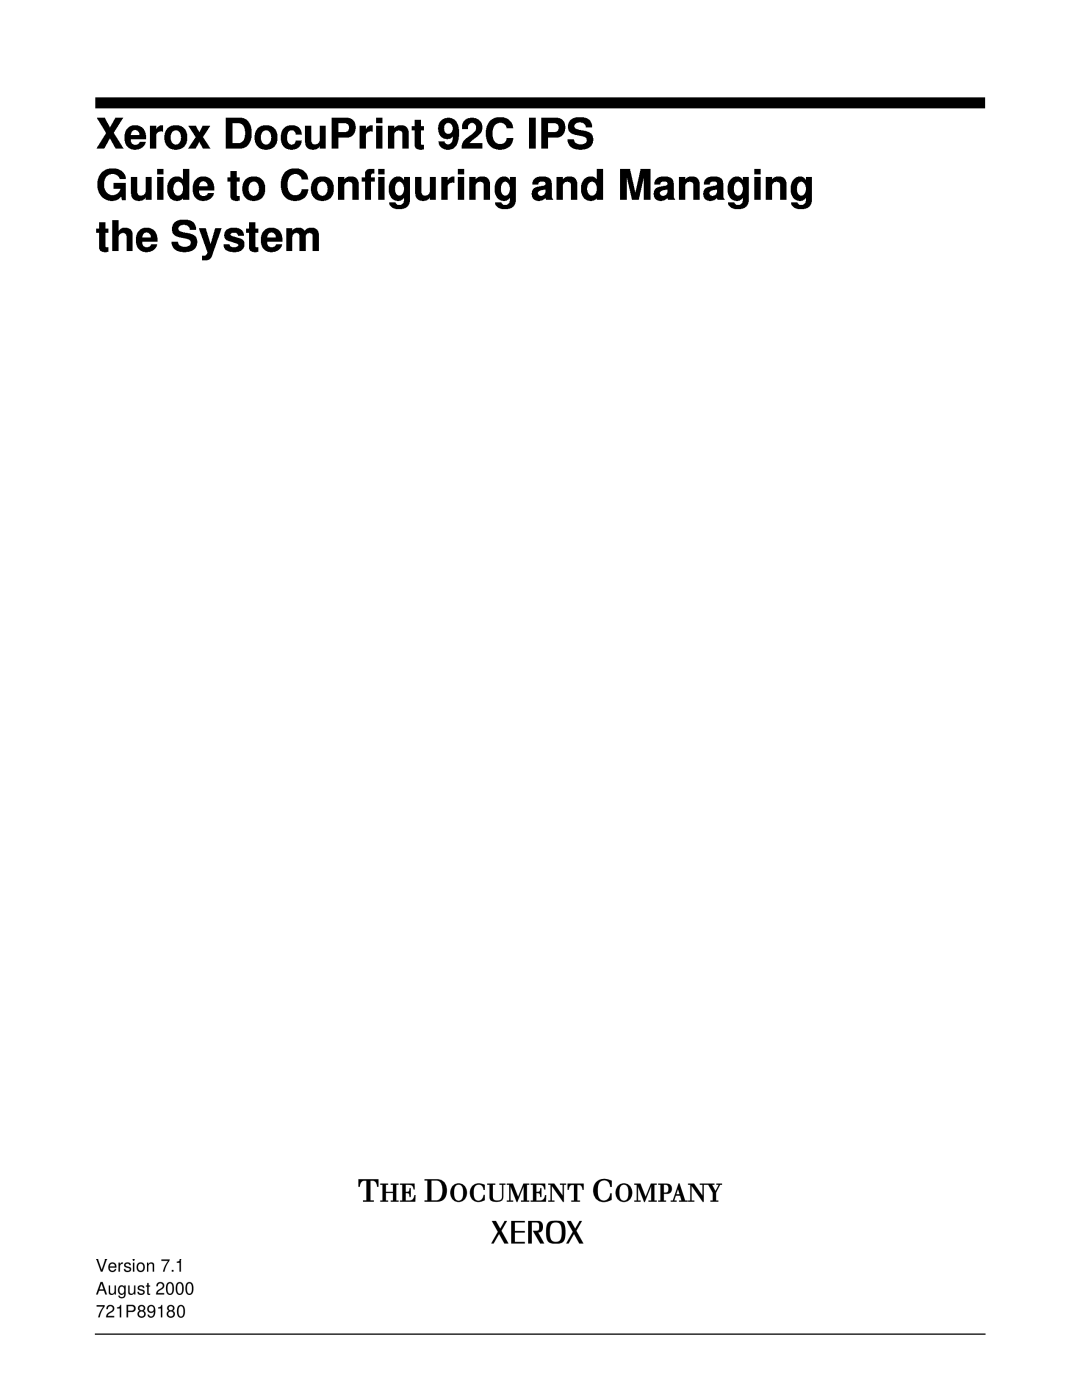 Xerox manual Xerox DocuPrint 92C IPS Guide to Configuring and Managing the System, Version 7.1 August 2000 721P89180 